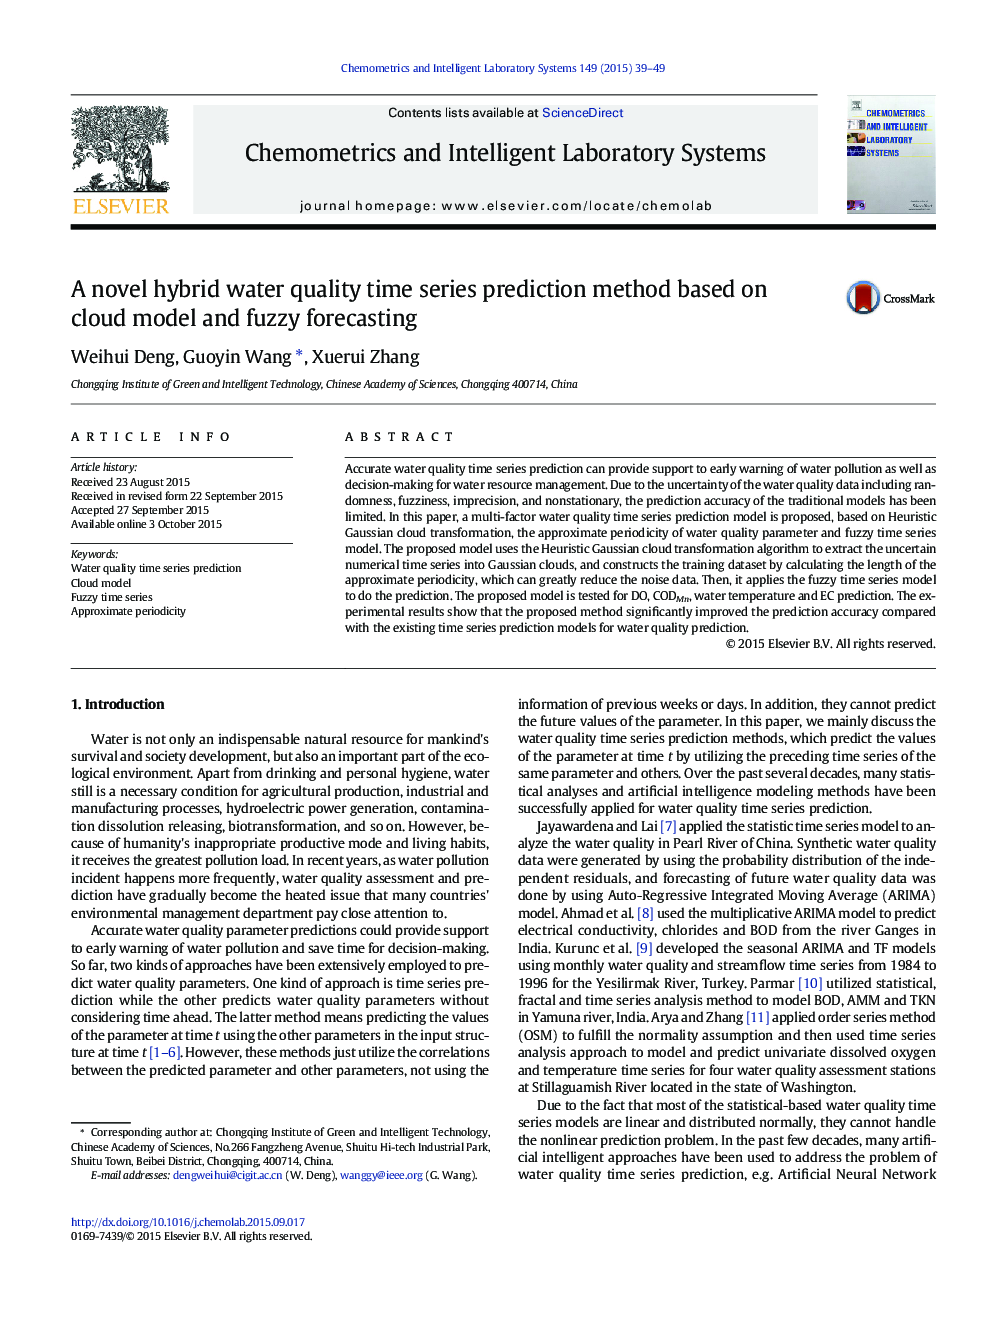 A novel hybrid water quality time series prediction method based on cloud model and fuzzy forecasting